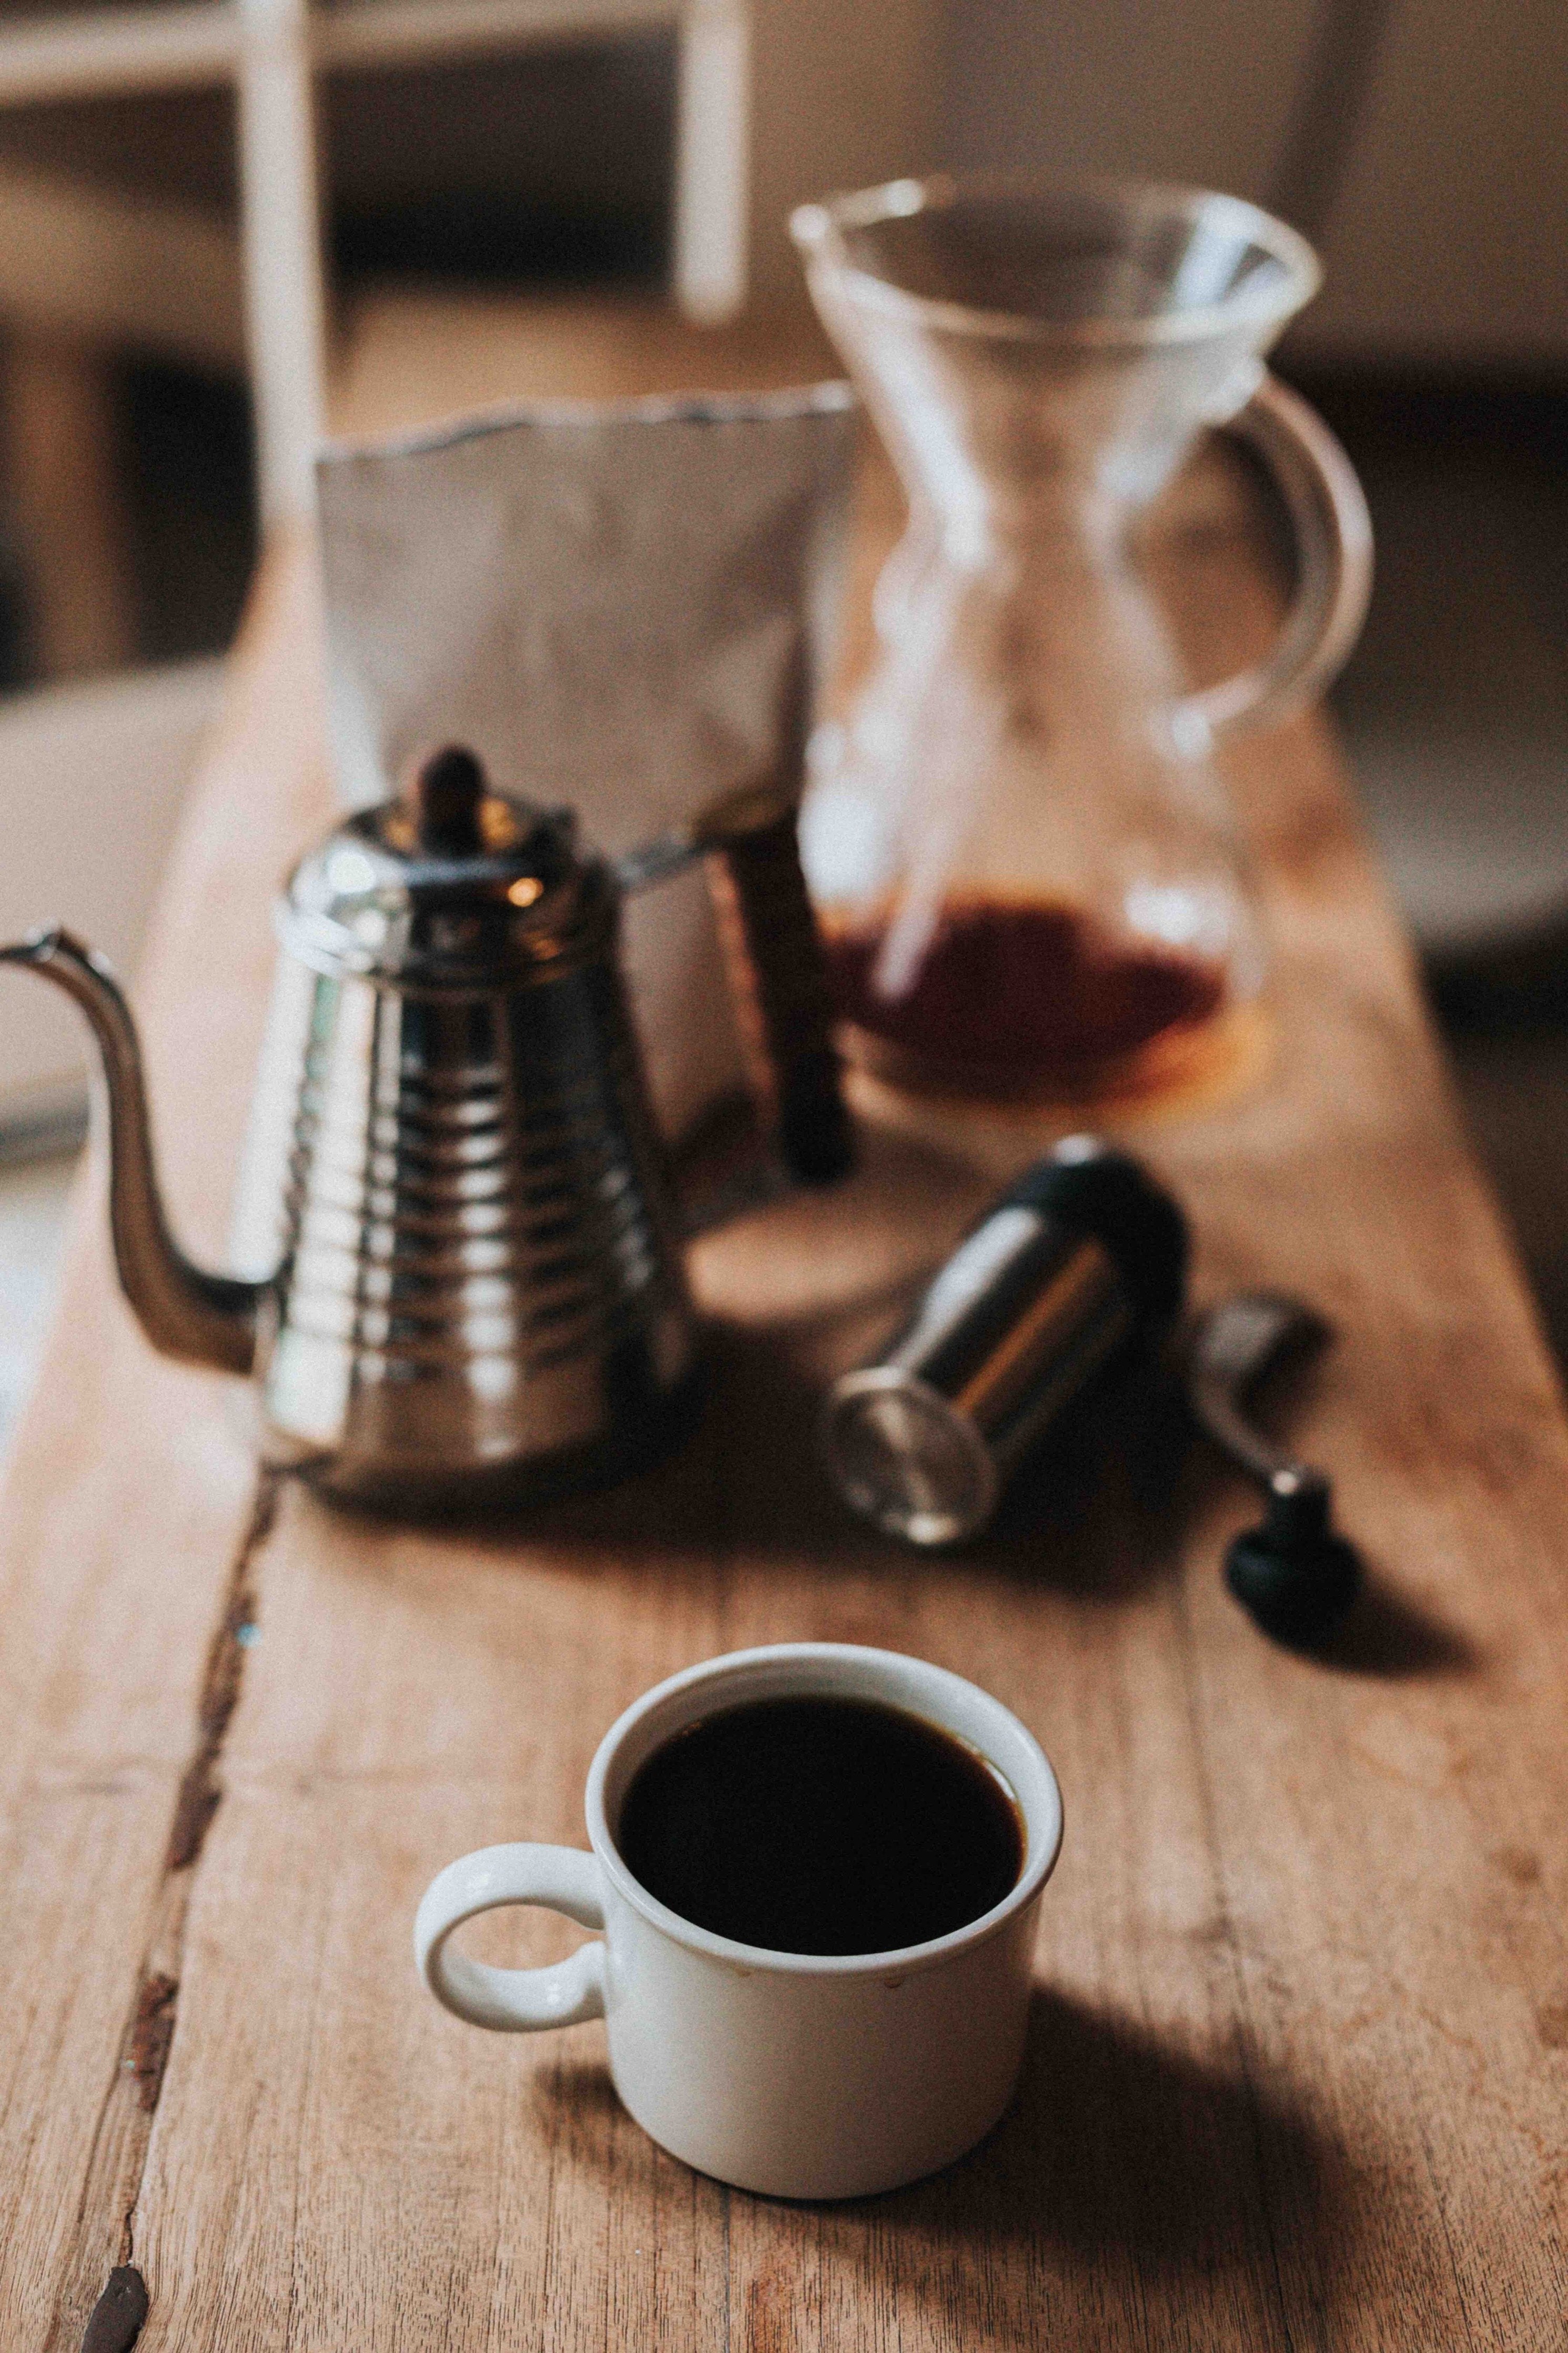 A Chemex brewer, a goose-neck kettle, a hand burr grinder, and a mug of coffee.